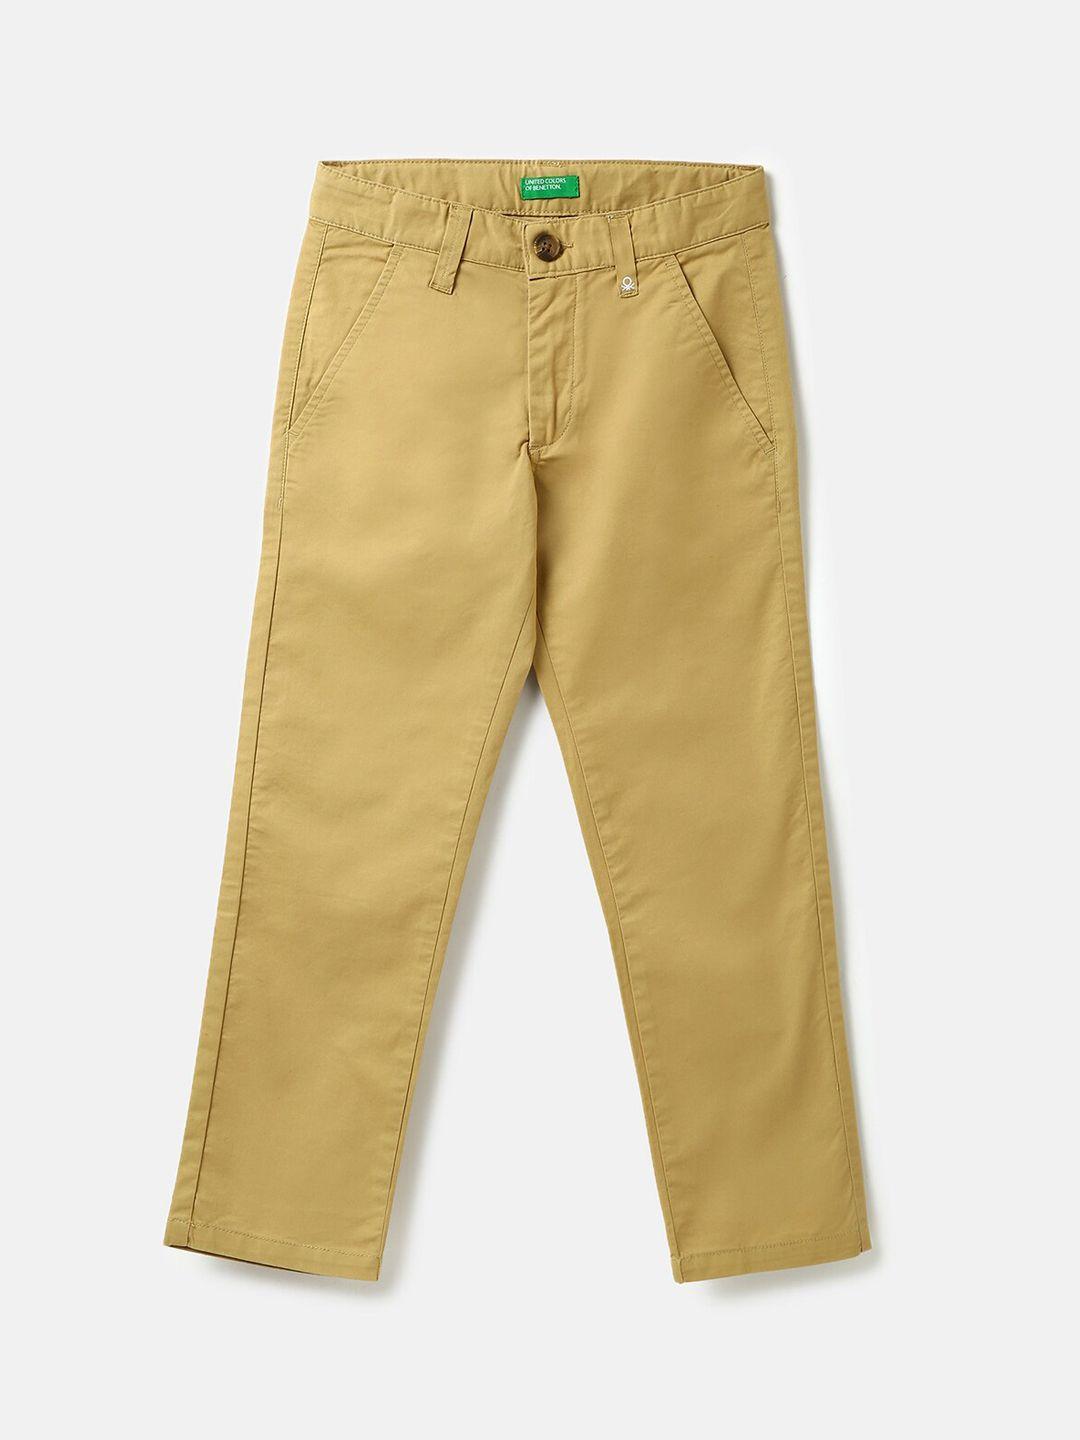 United Colors of Benetton Boys Regular Fit Cotton Chinos